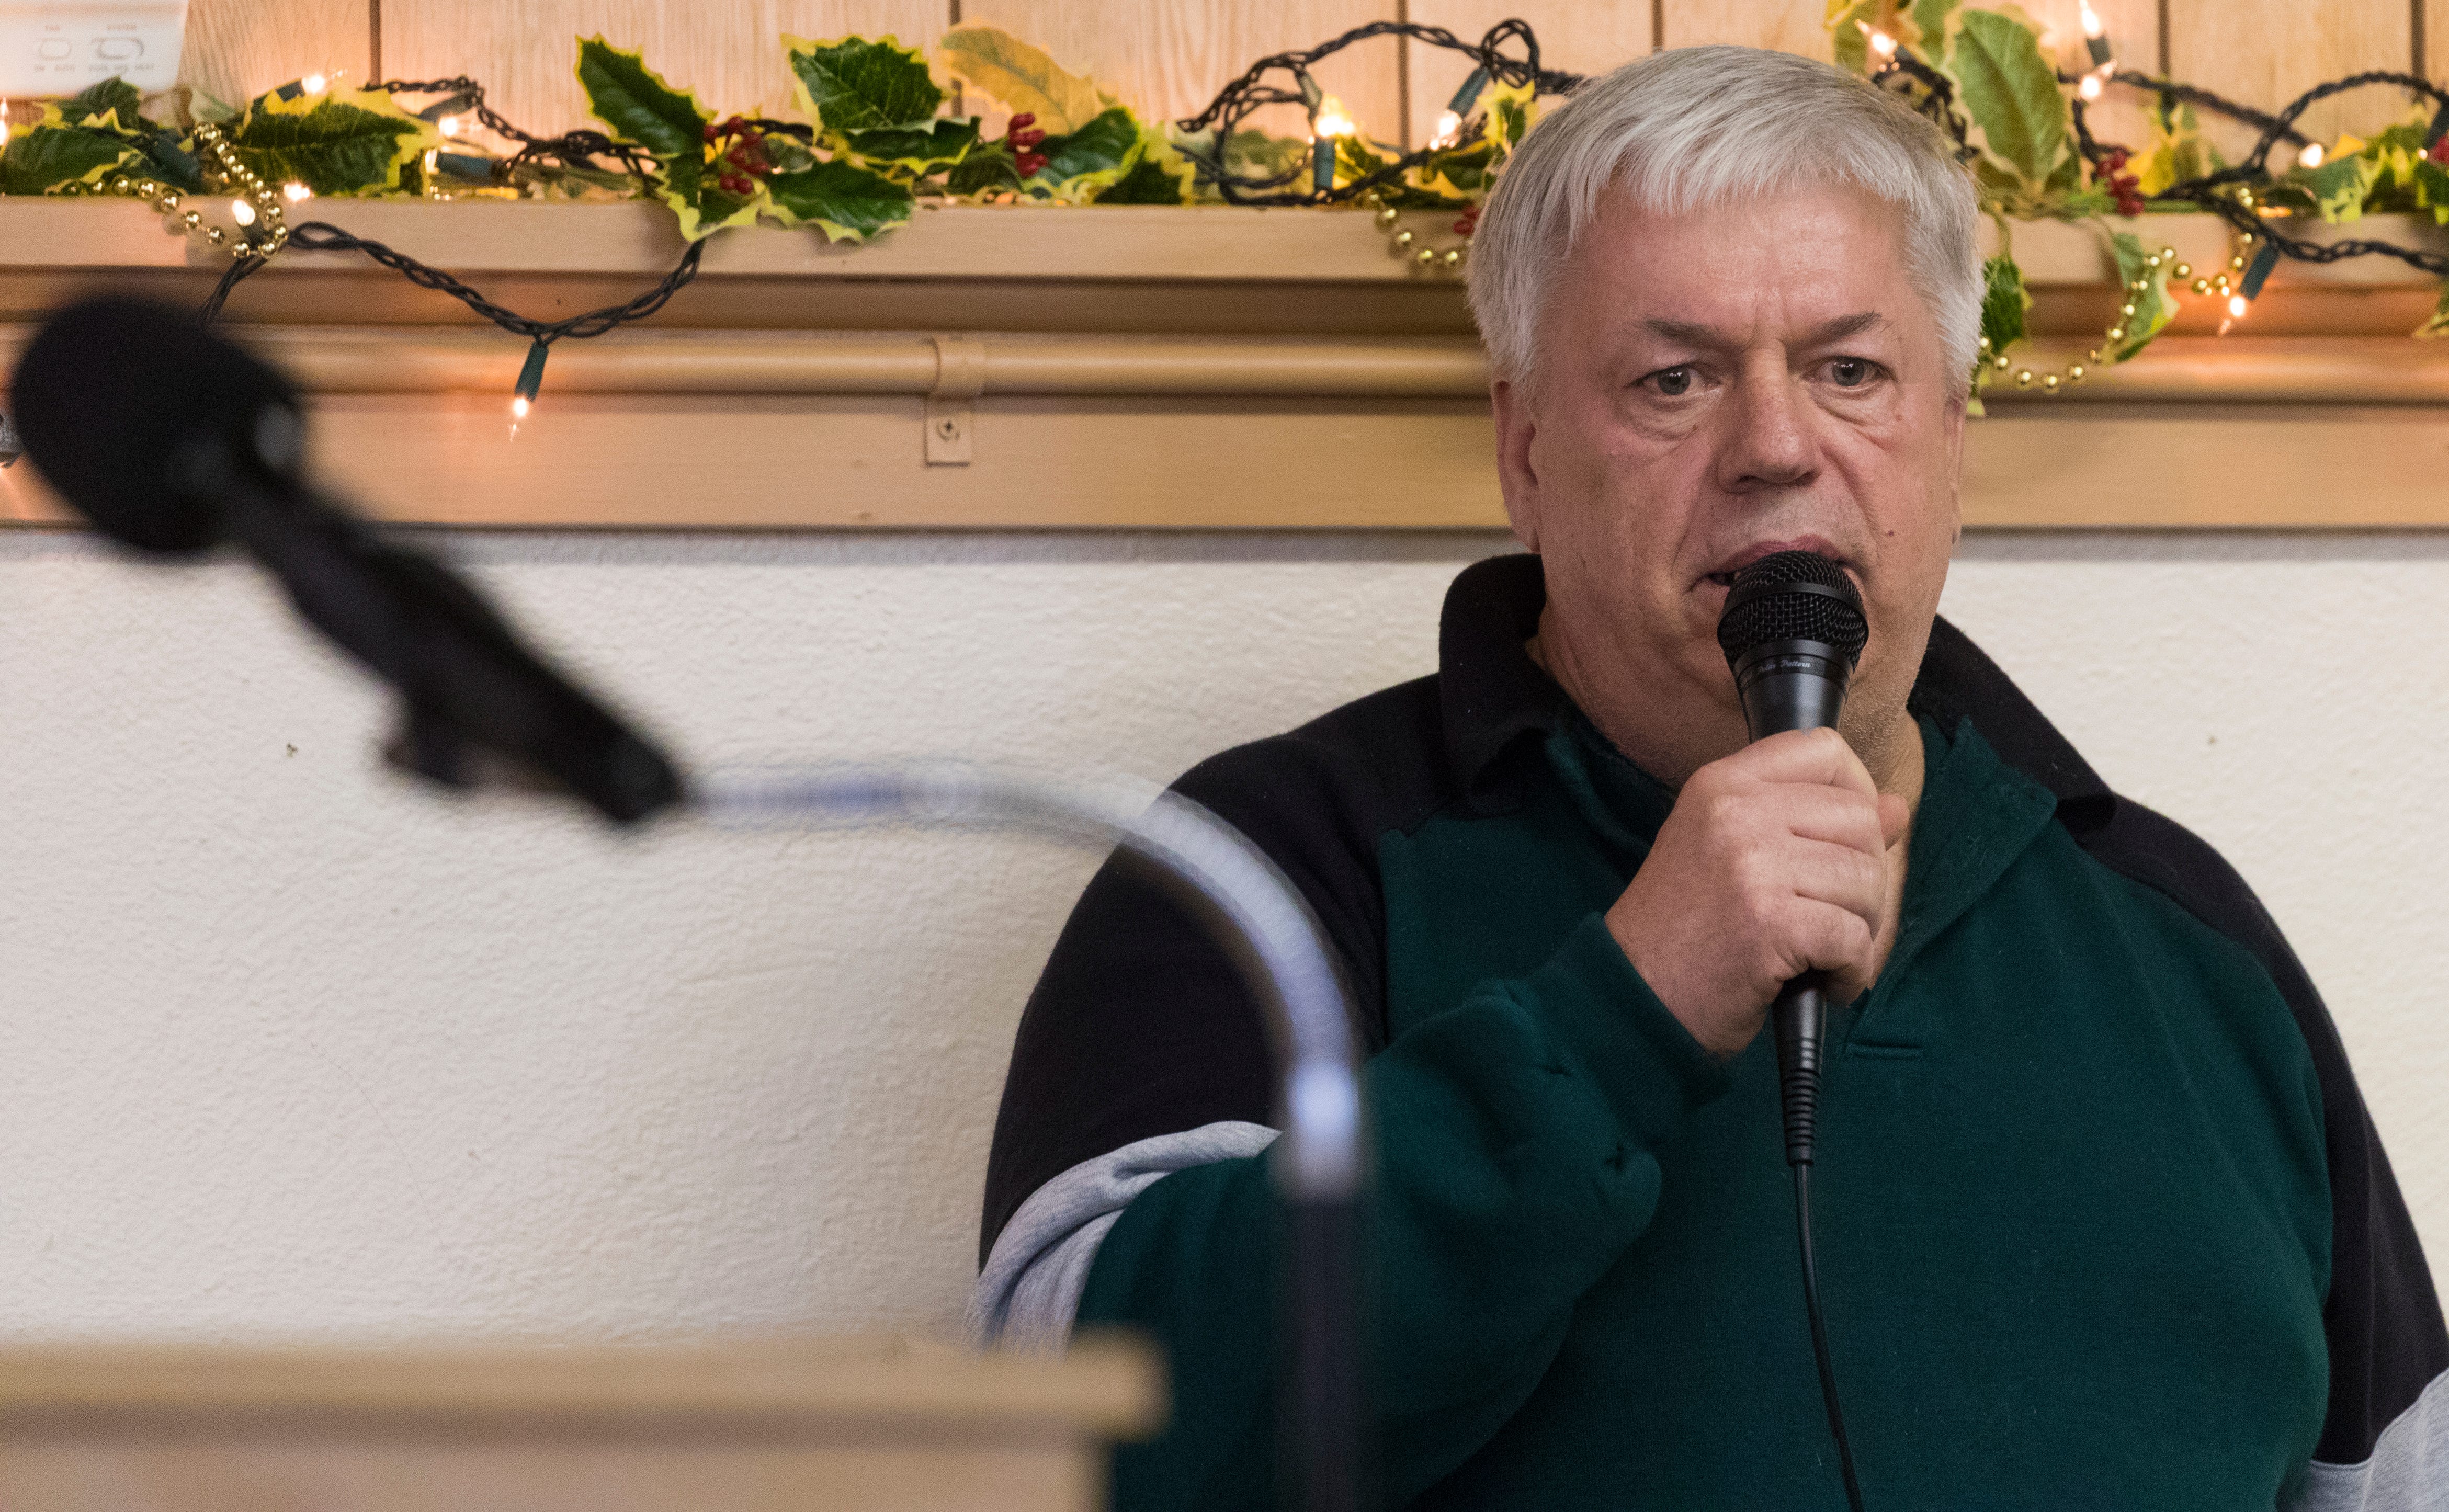 Former dairy farmer Steven Rynkowski sings "Take Heart My Friend" during a Farm Neighbors Care gathering at St. Peter's Lutheran Church in Loganville. He gave up dairy farming after battling depression, and the stress brought on by a farm expansion.